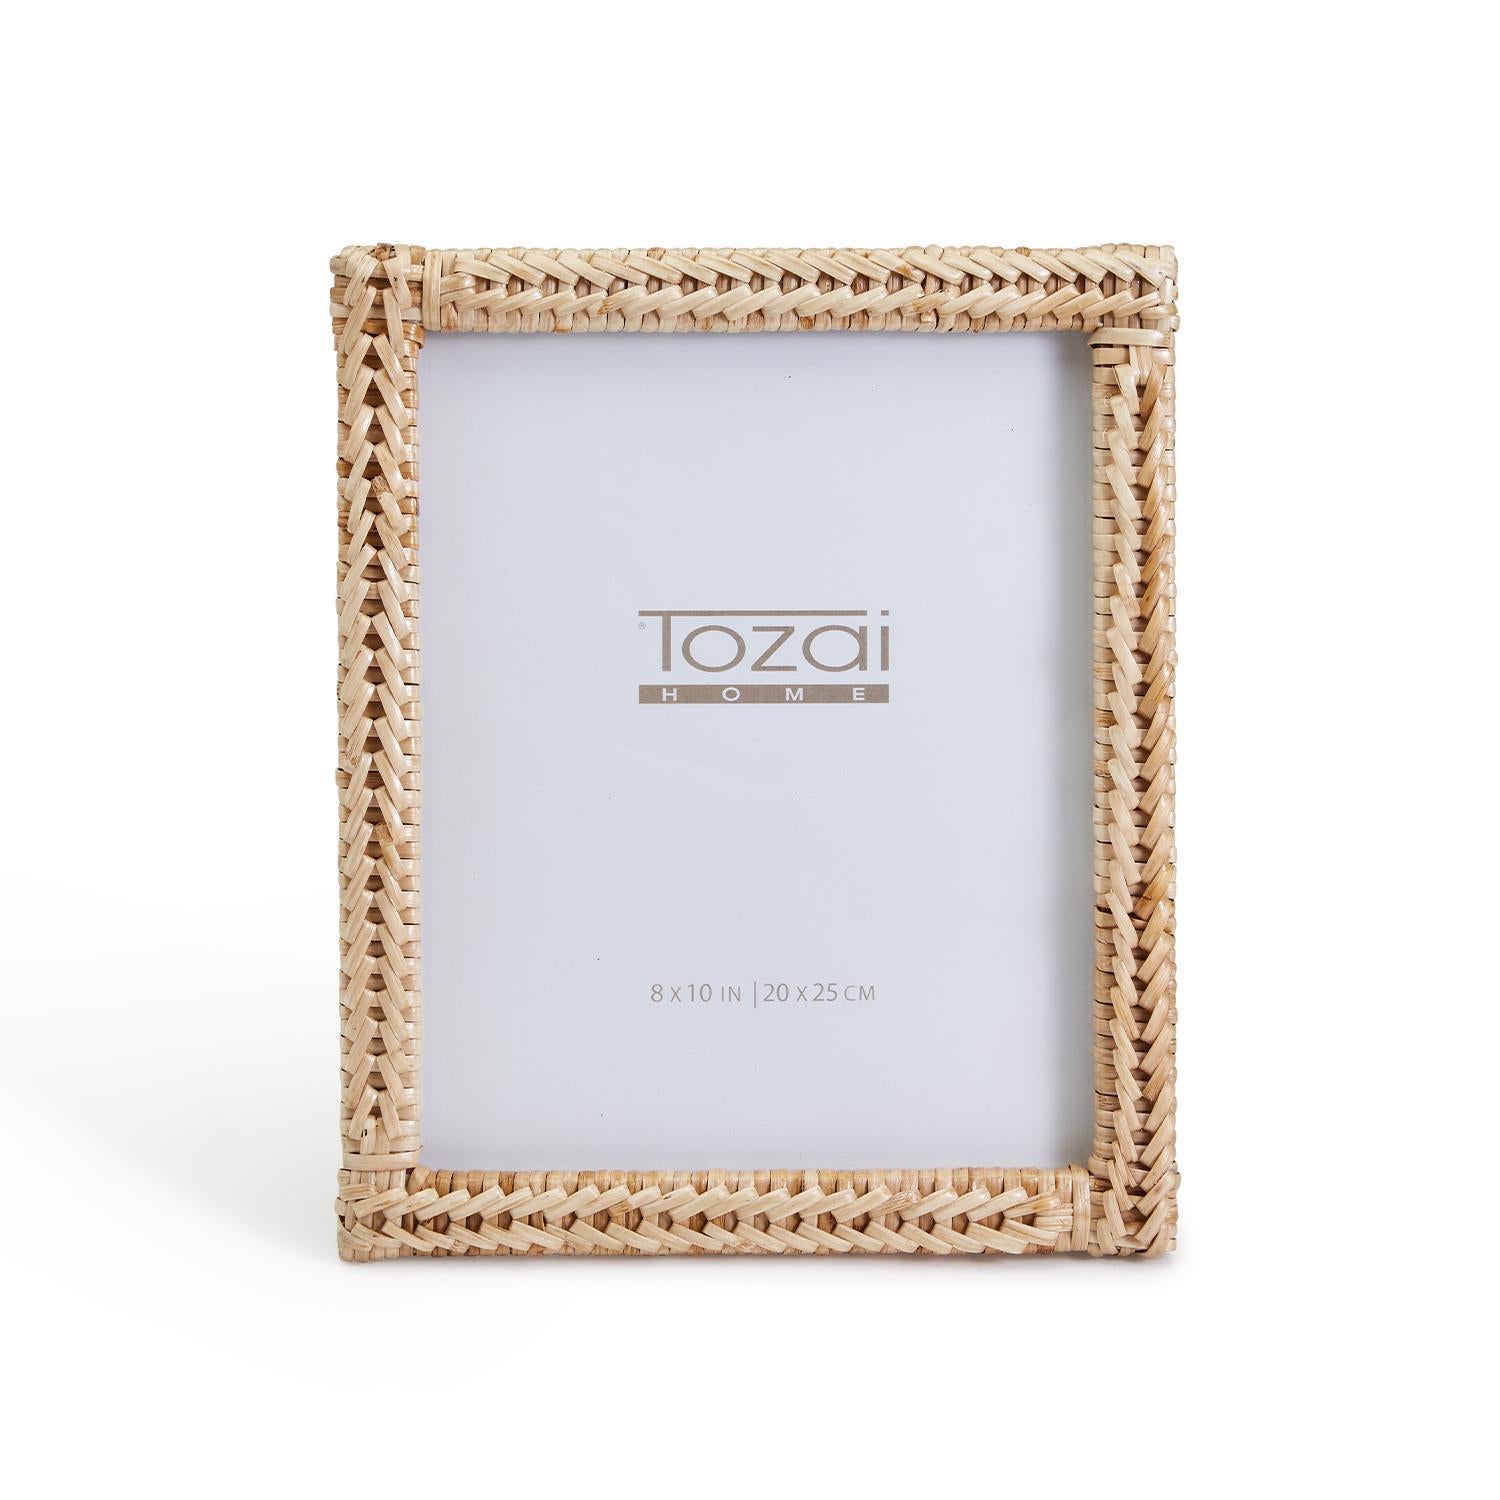 Two's Company 8 x 10 Woven Rattan Photo Frame